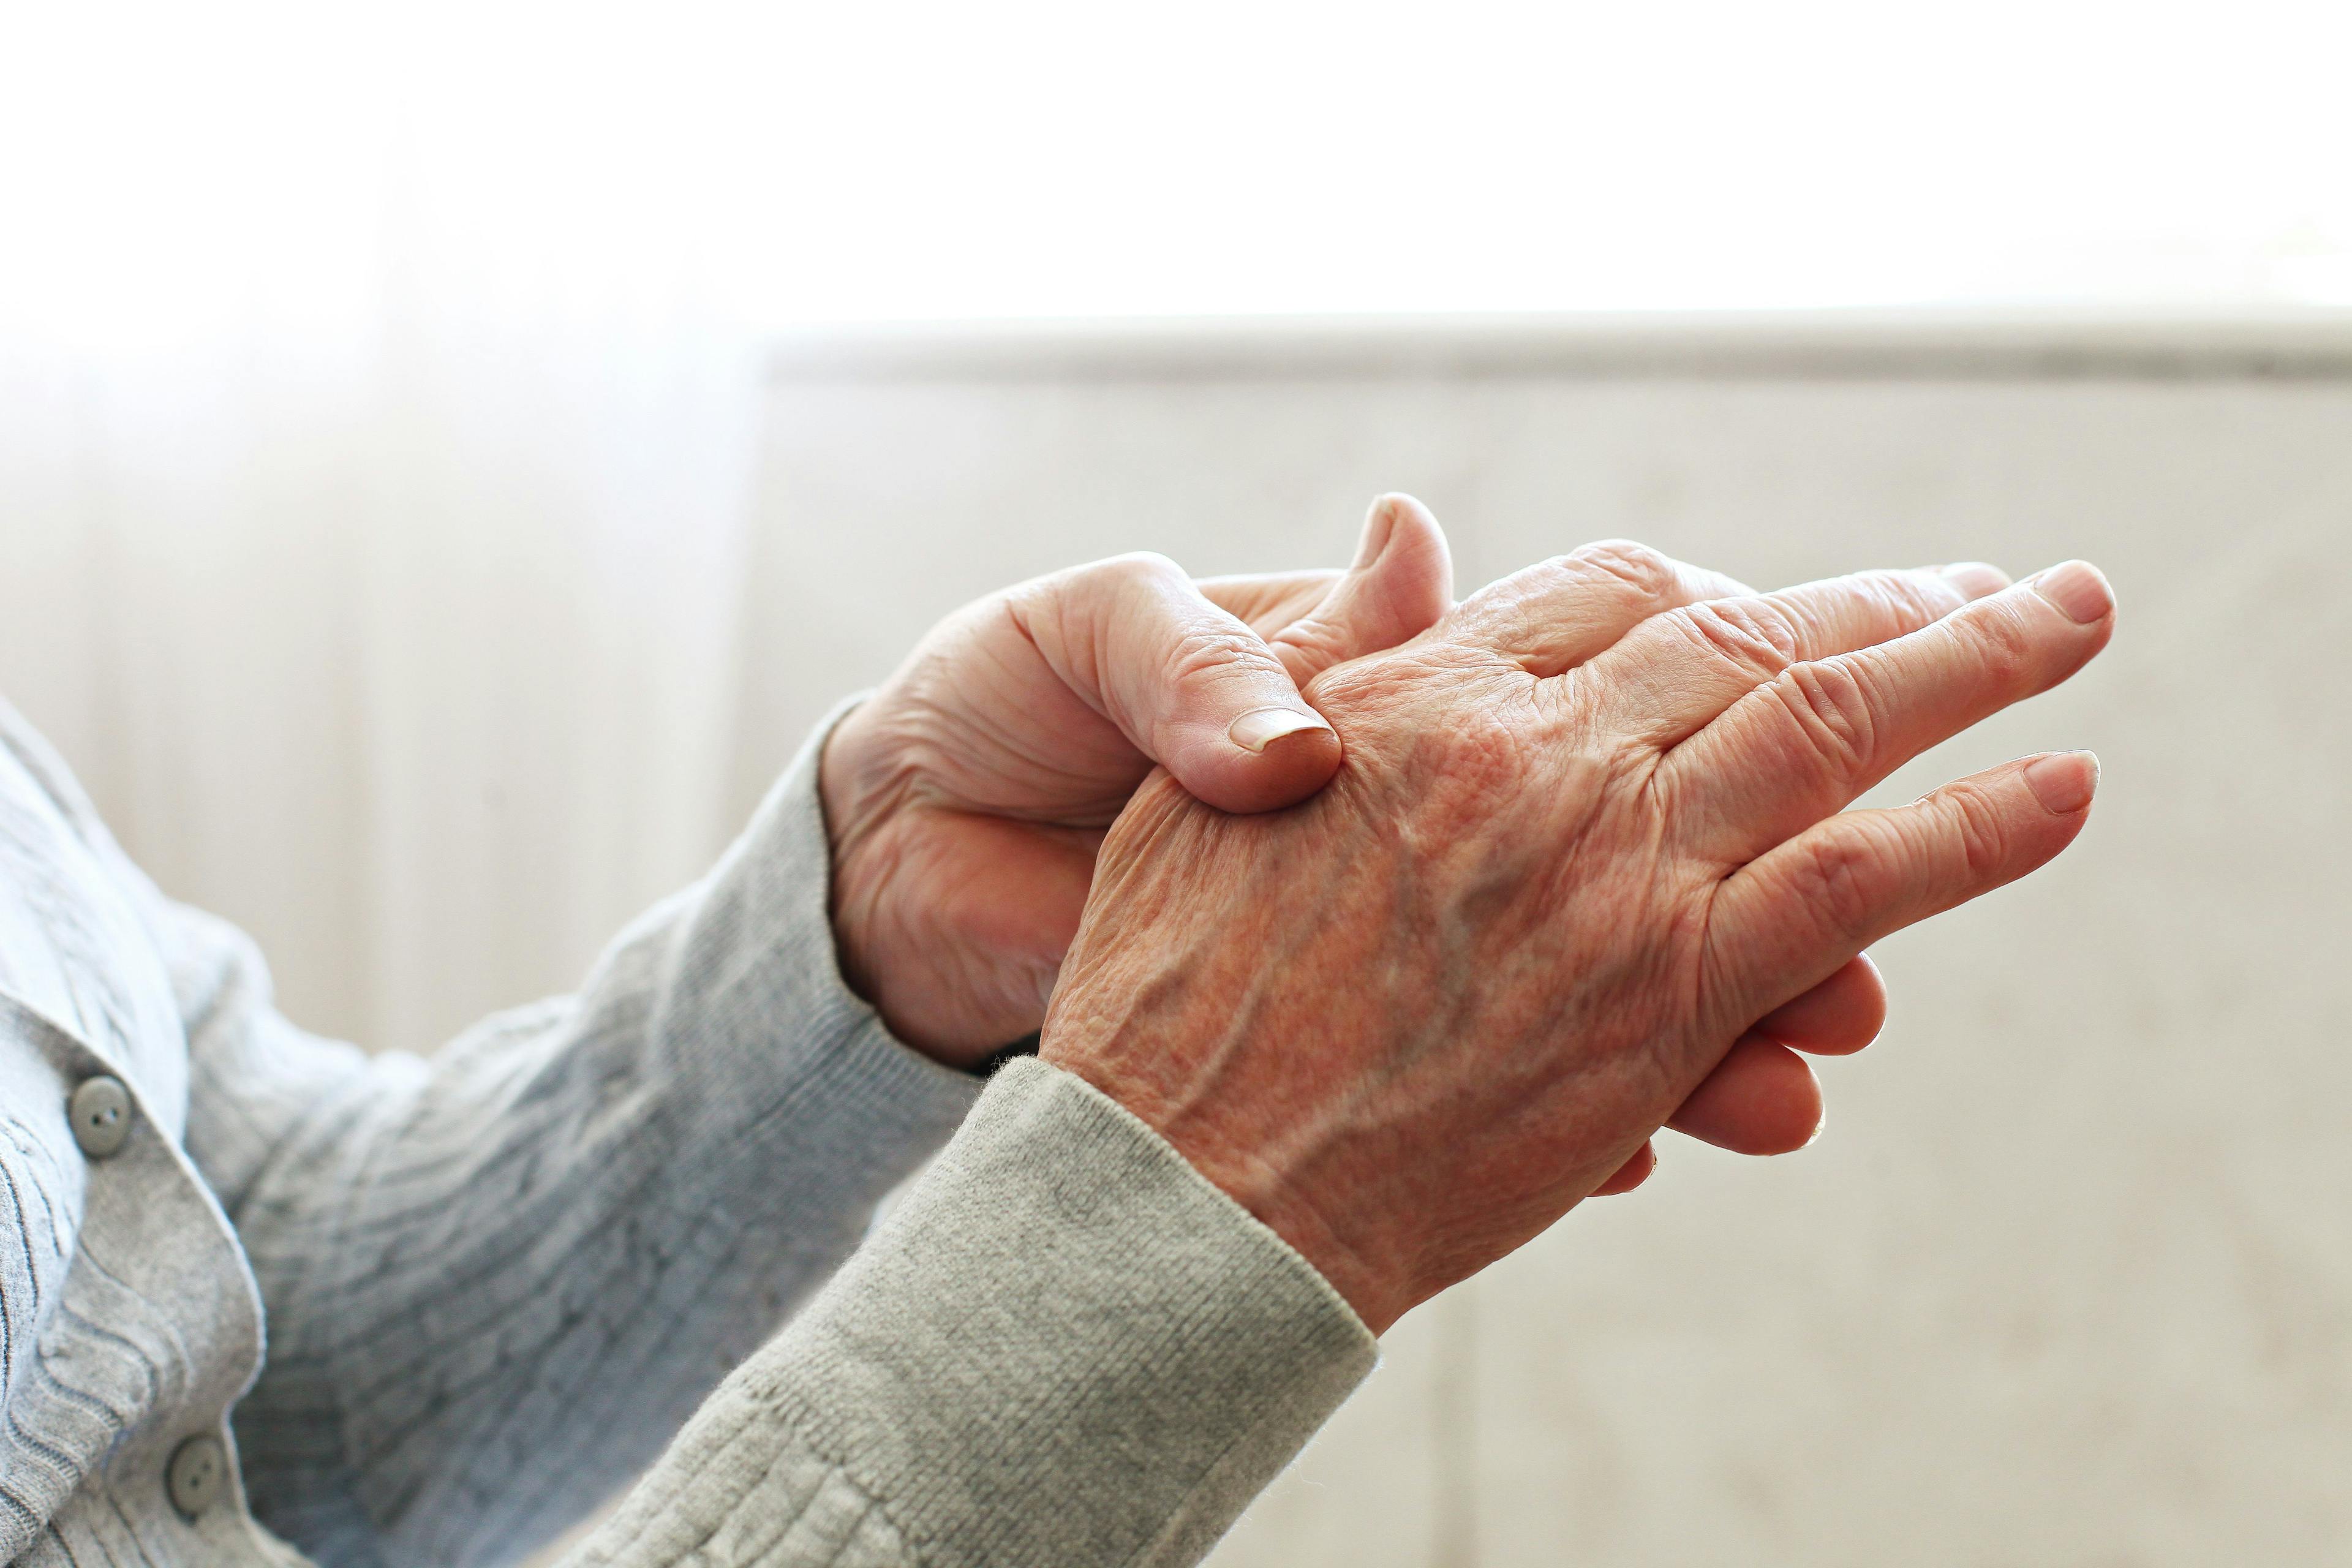 Elderly woman applying moisturizing lotion cream on hand palm, easing aches. Senior old lady experiencing severe arthritis rheumatics pains, massaging, warming up arm. Close up, copy space, background | Image Credit: Evrymmnt - stock.adobe.com